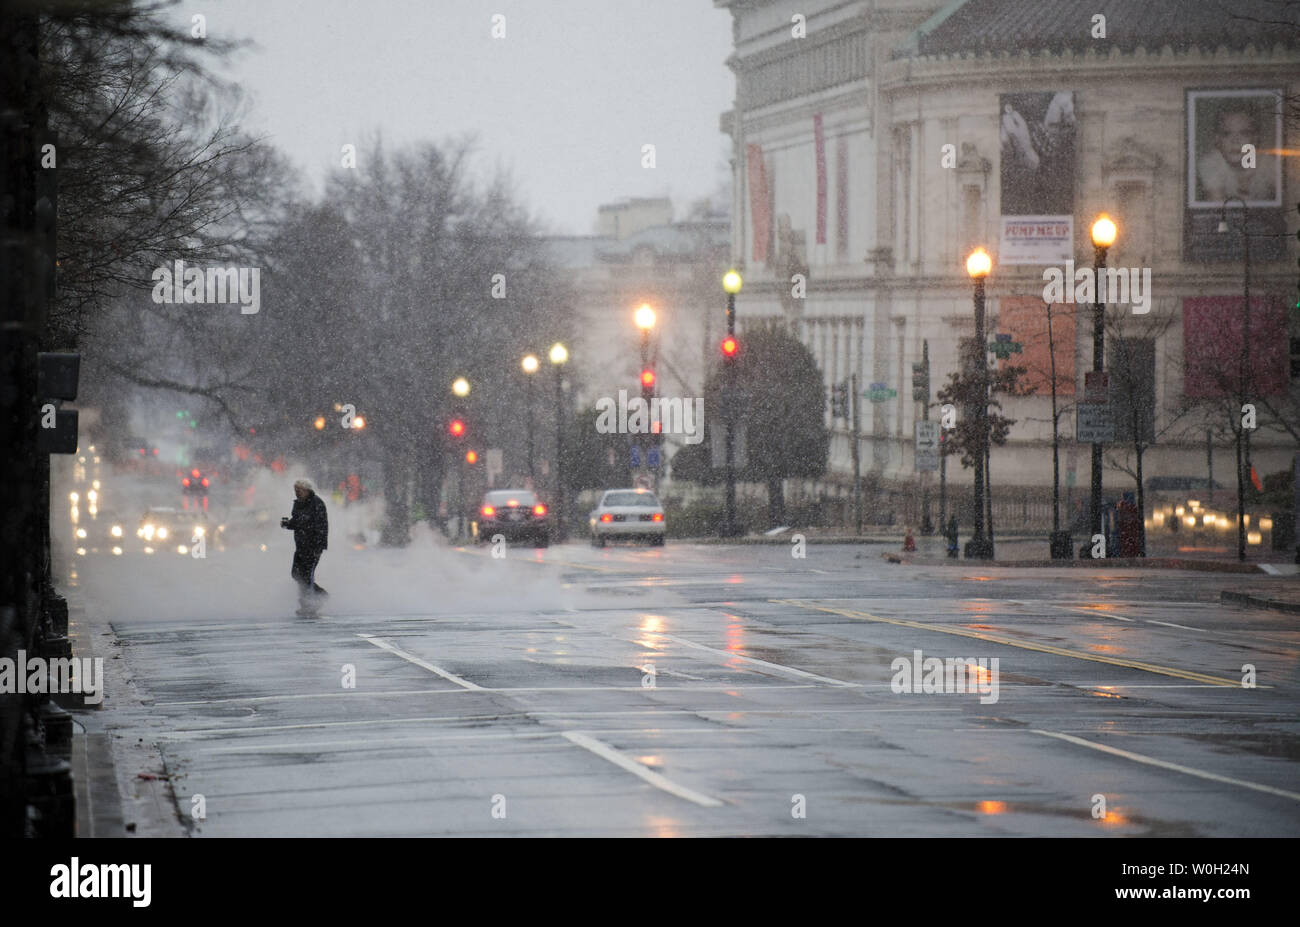 A person crosses the street as snow and rain falls on March 6, 2013 in Washington, D.C. Meteorologist are predicting anywhere from five to ten inches of snow to fall inside the Capital Beltway, and significantly more further north and west.  UPI/Kevin Dietsch Stock Photo